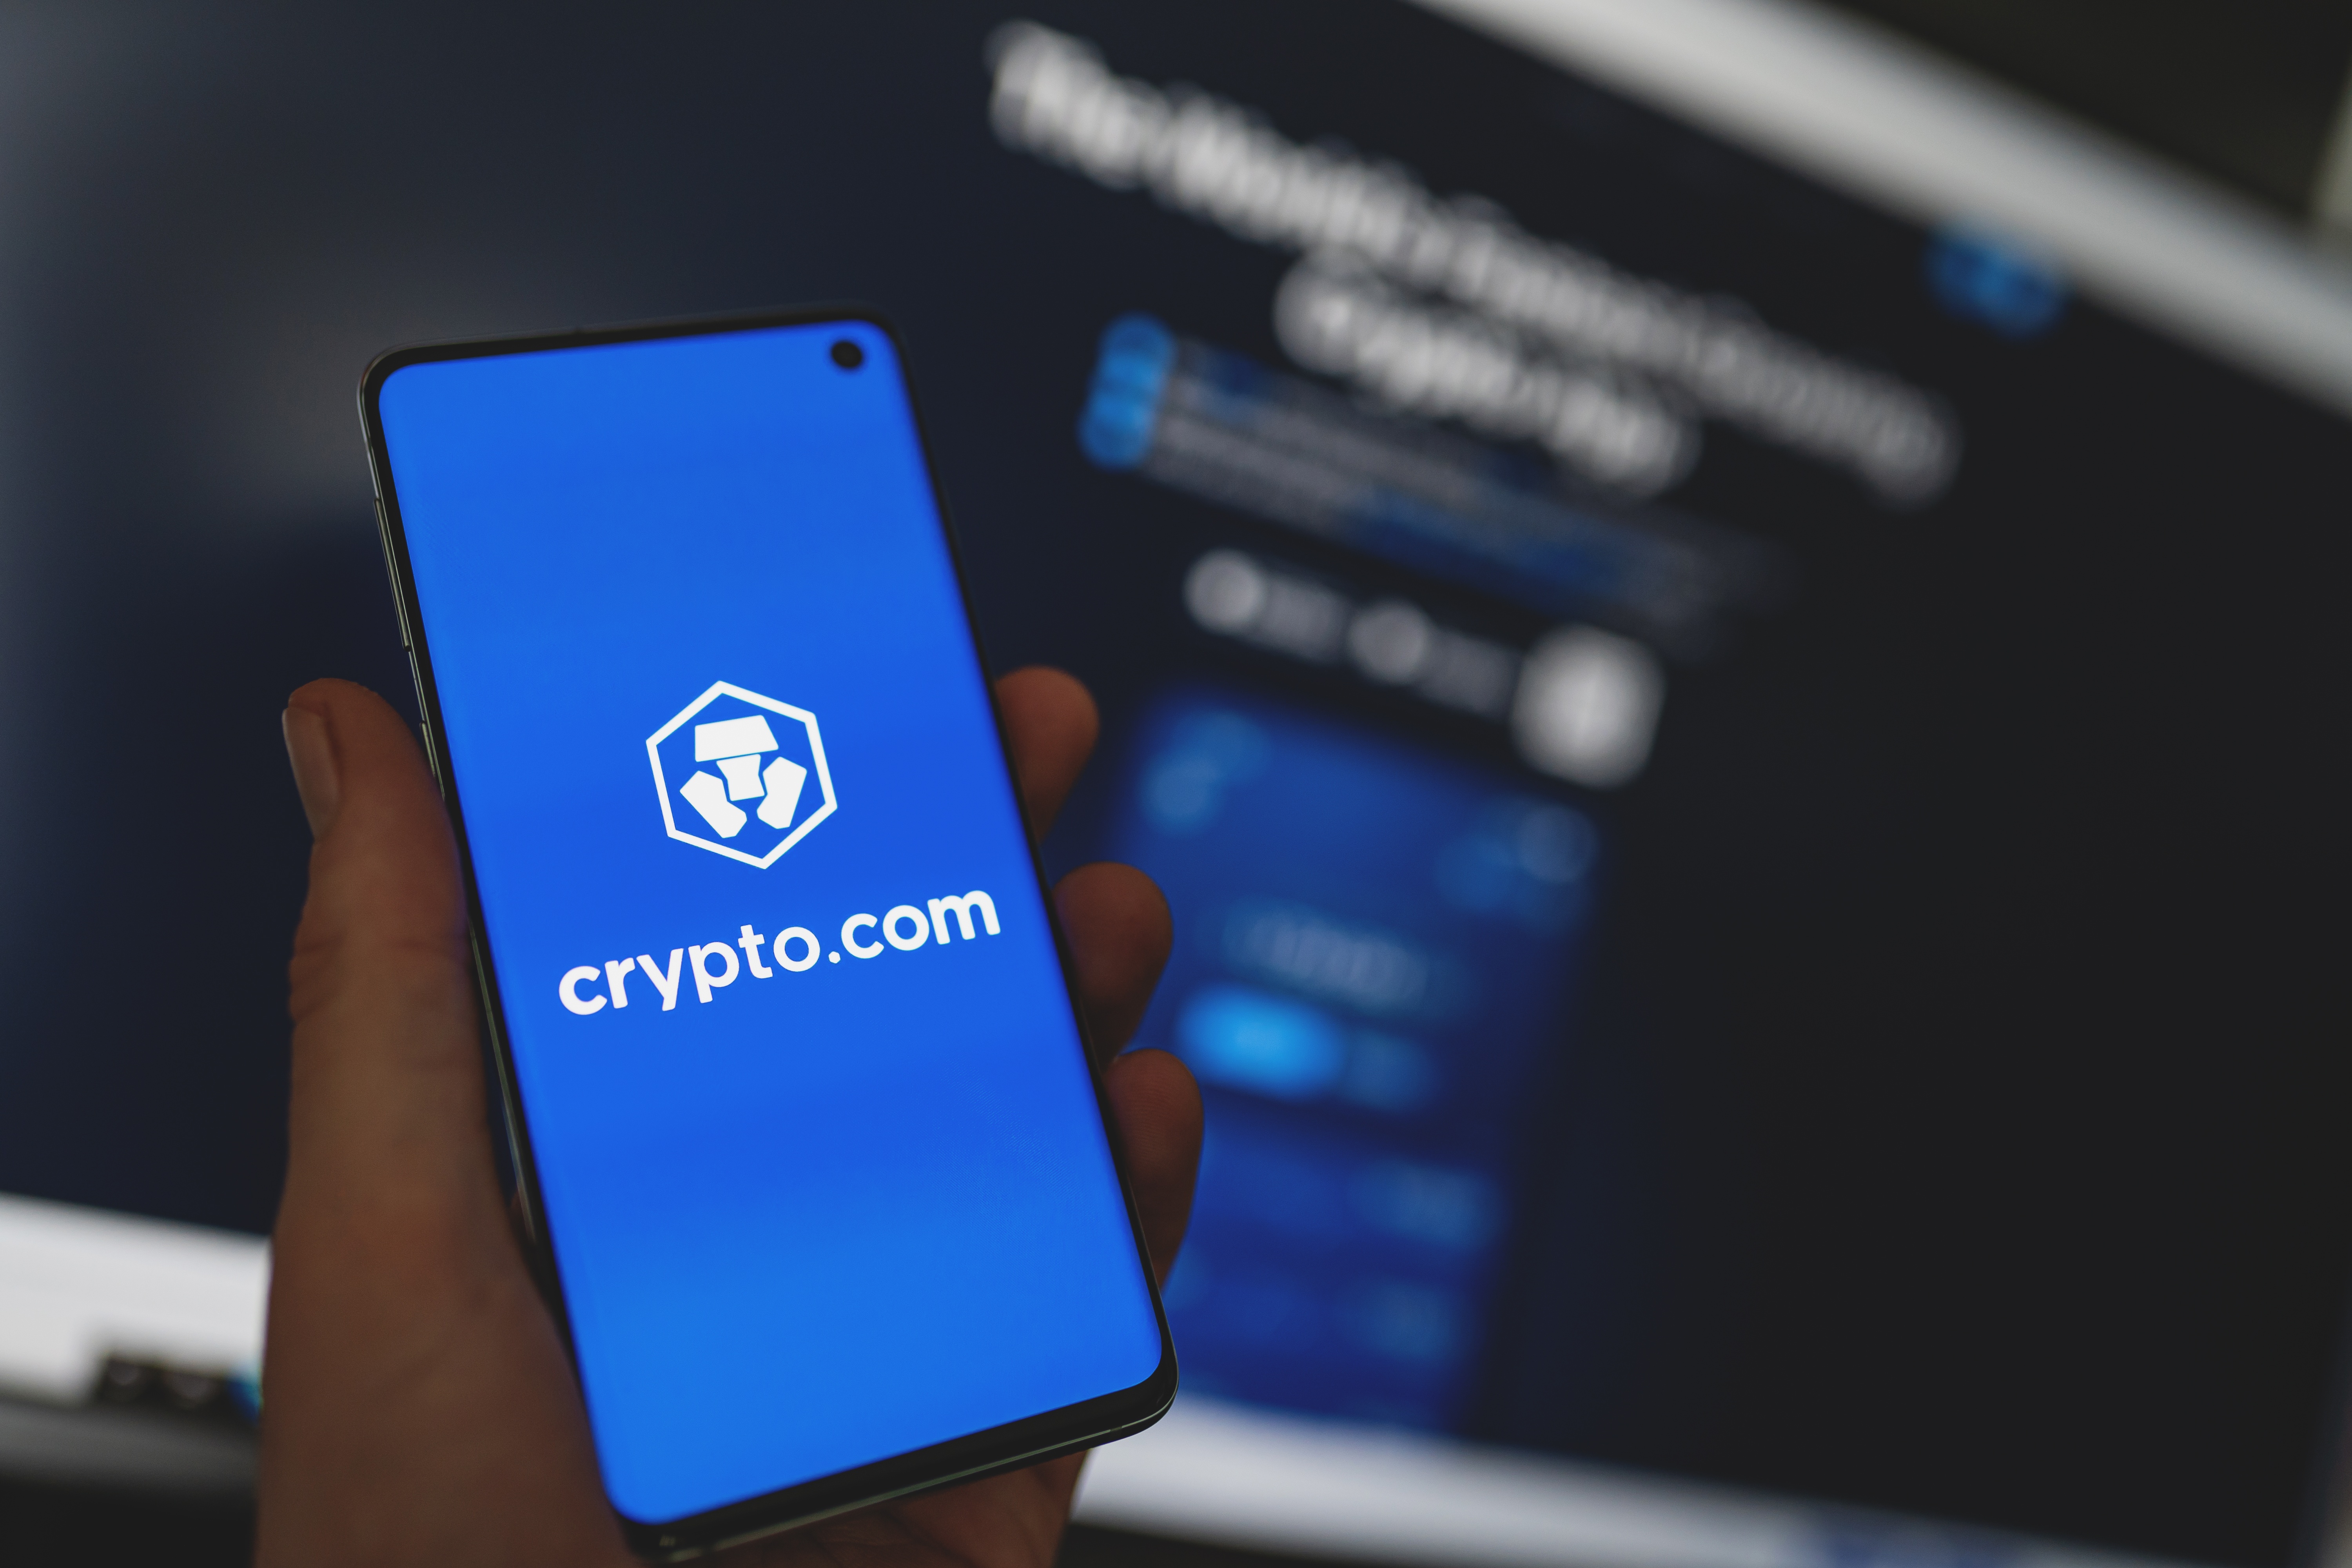 Crypto.com to launch app in South Korea on April 29